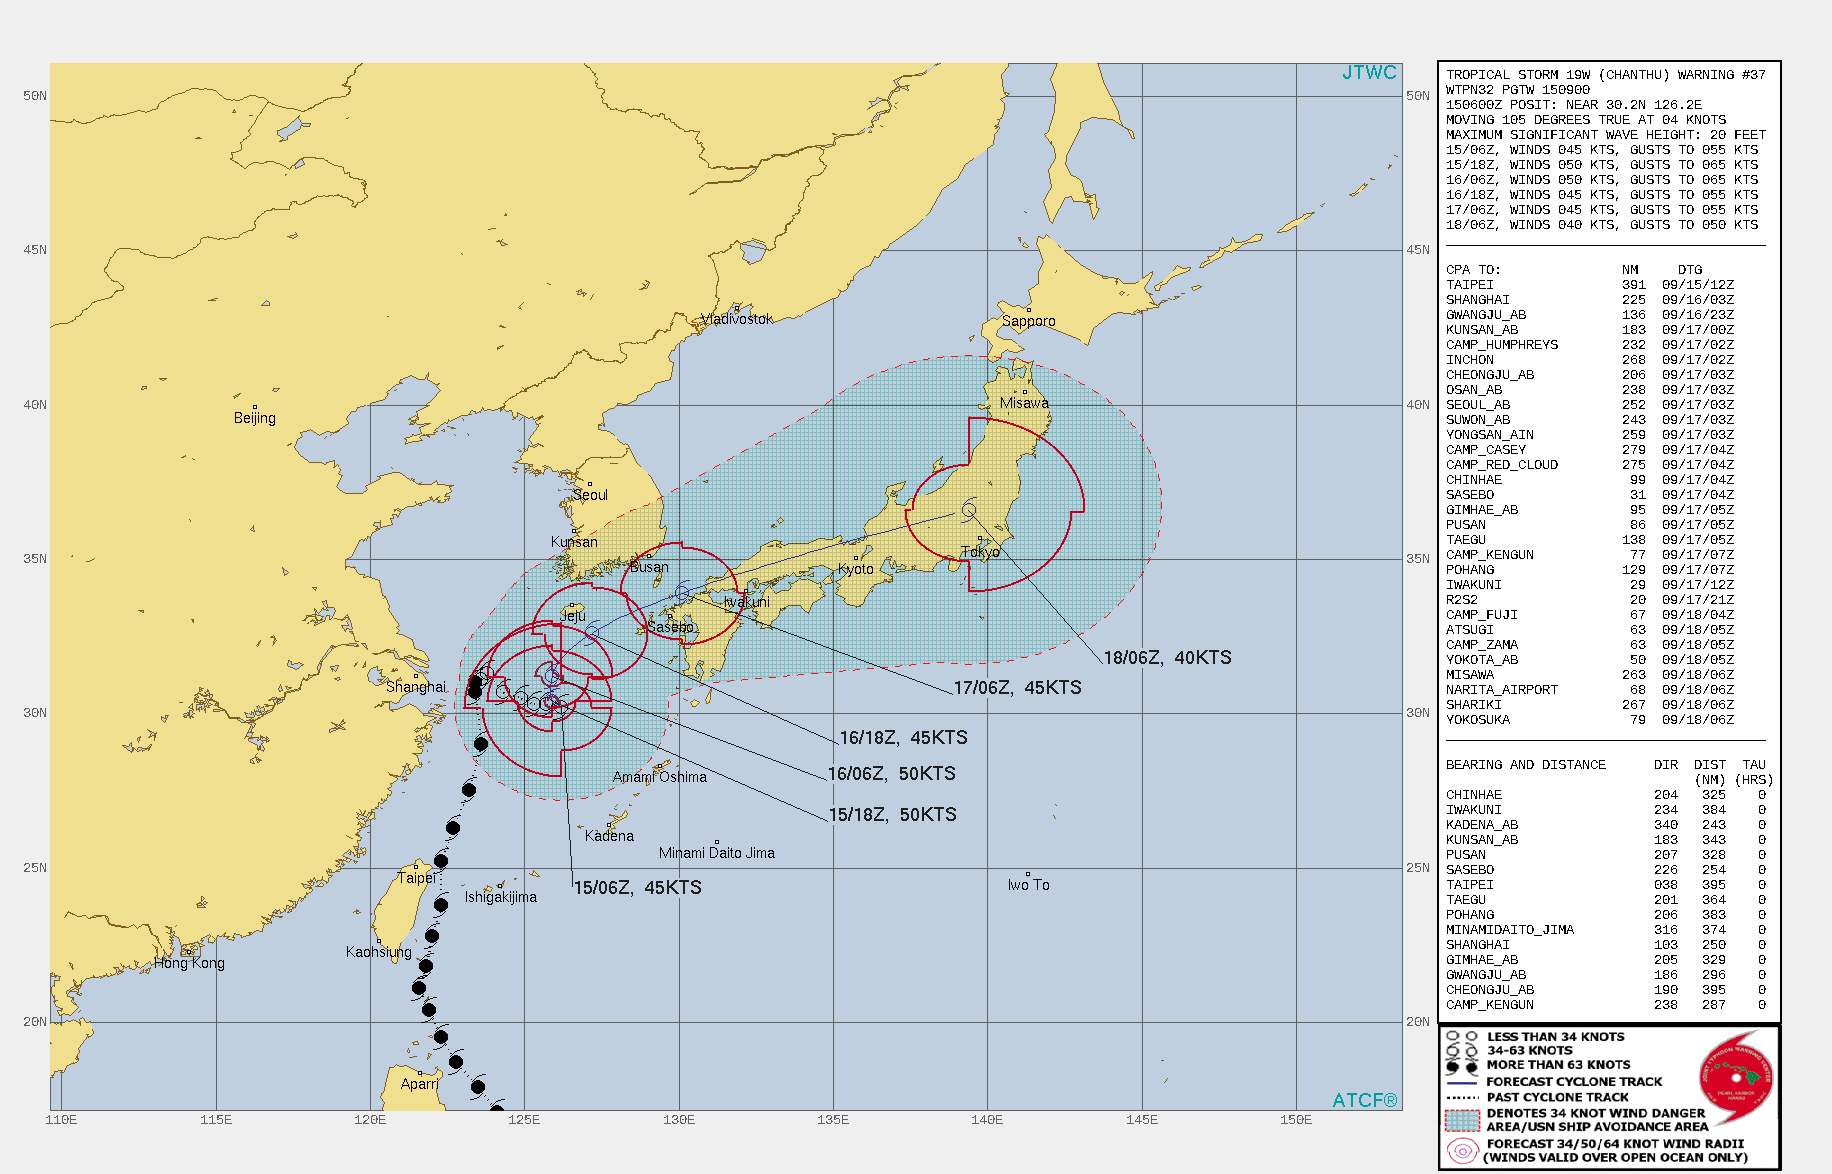 TS 19W(CHANTHU). WARNING 37 ISSUED AT 15/09UTC.SIGNIFICANT FORECAST CHANGES: TRACK SHIFTED TO THE SOUTH ACROSS THE SPINE OF JAPAN.FORECAST DISCUSSION: TS 19W IS EXPECTED TO FINALLY BEGIN ITS RECURVE AROUND THE SUBTROPICAL RIDGE, LOCATED TO ITS SOUTHEAST, BY 12H. THE MARGINALLY FAVORABLE ENVIRONMENT OVER THE NEXT 24 HOURS WILL LIKELY ALLOW FOR SLIGHT INTENSIFICATION TO 50 KNOTS AS IT APPROACHES THE TSUSHIMA STRAIT UNDER INCREASED UPPER LEVEL OUTFLOW, LOW SHEAR(VWS) AND WARM SEA SURFACE TEMPERATURES (28-29 DEGREES CELSIUS). AS THE SYSTEM TRACKS MORE POLEWARD, INCREASING VWS AND LAND INTERACTION WILL WEAKEN IT AS IT PASSES OVER JAPAN AND BEGINS EXTRATROPICAL TRANSITION. EXTRATROPICAL TRANSITION IS EXPECTED TO COMPLETE NO LATER THAN 72H.